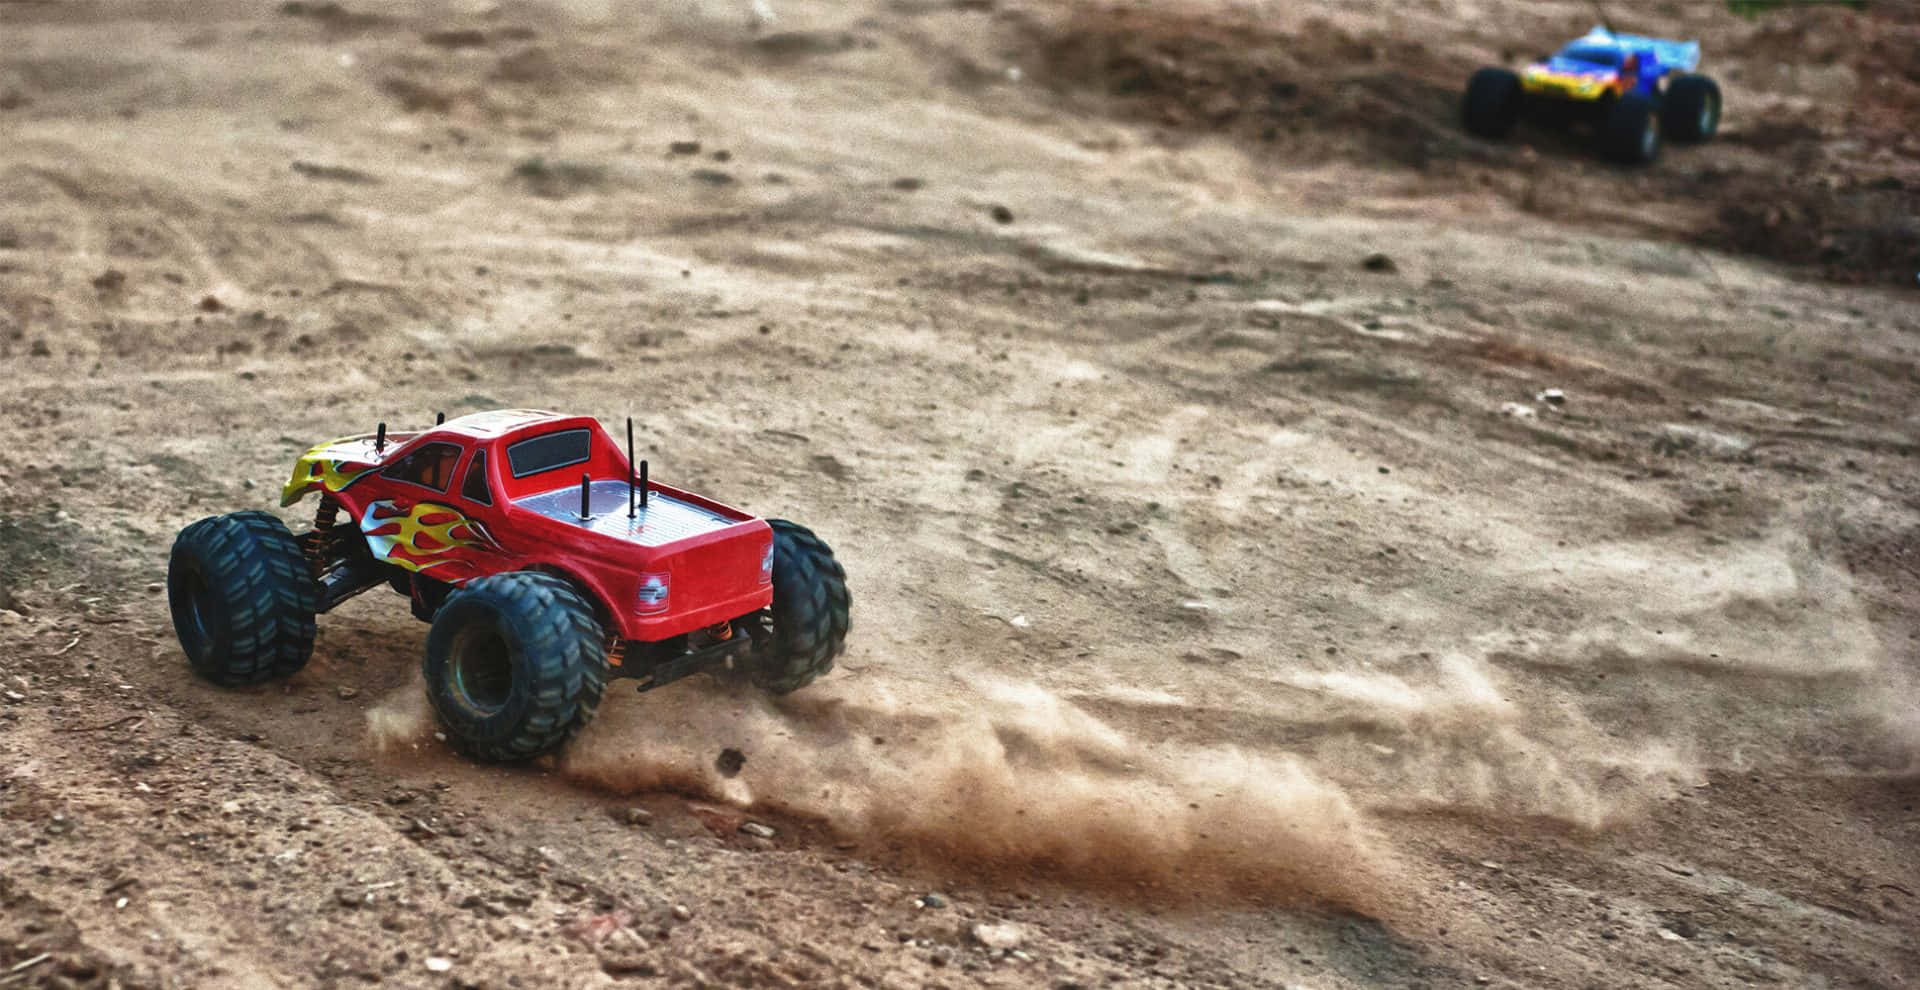 Two Red Monster Trucks Are Driving Down A Dirt Road